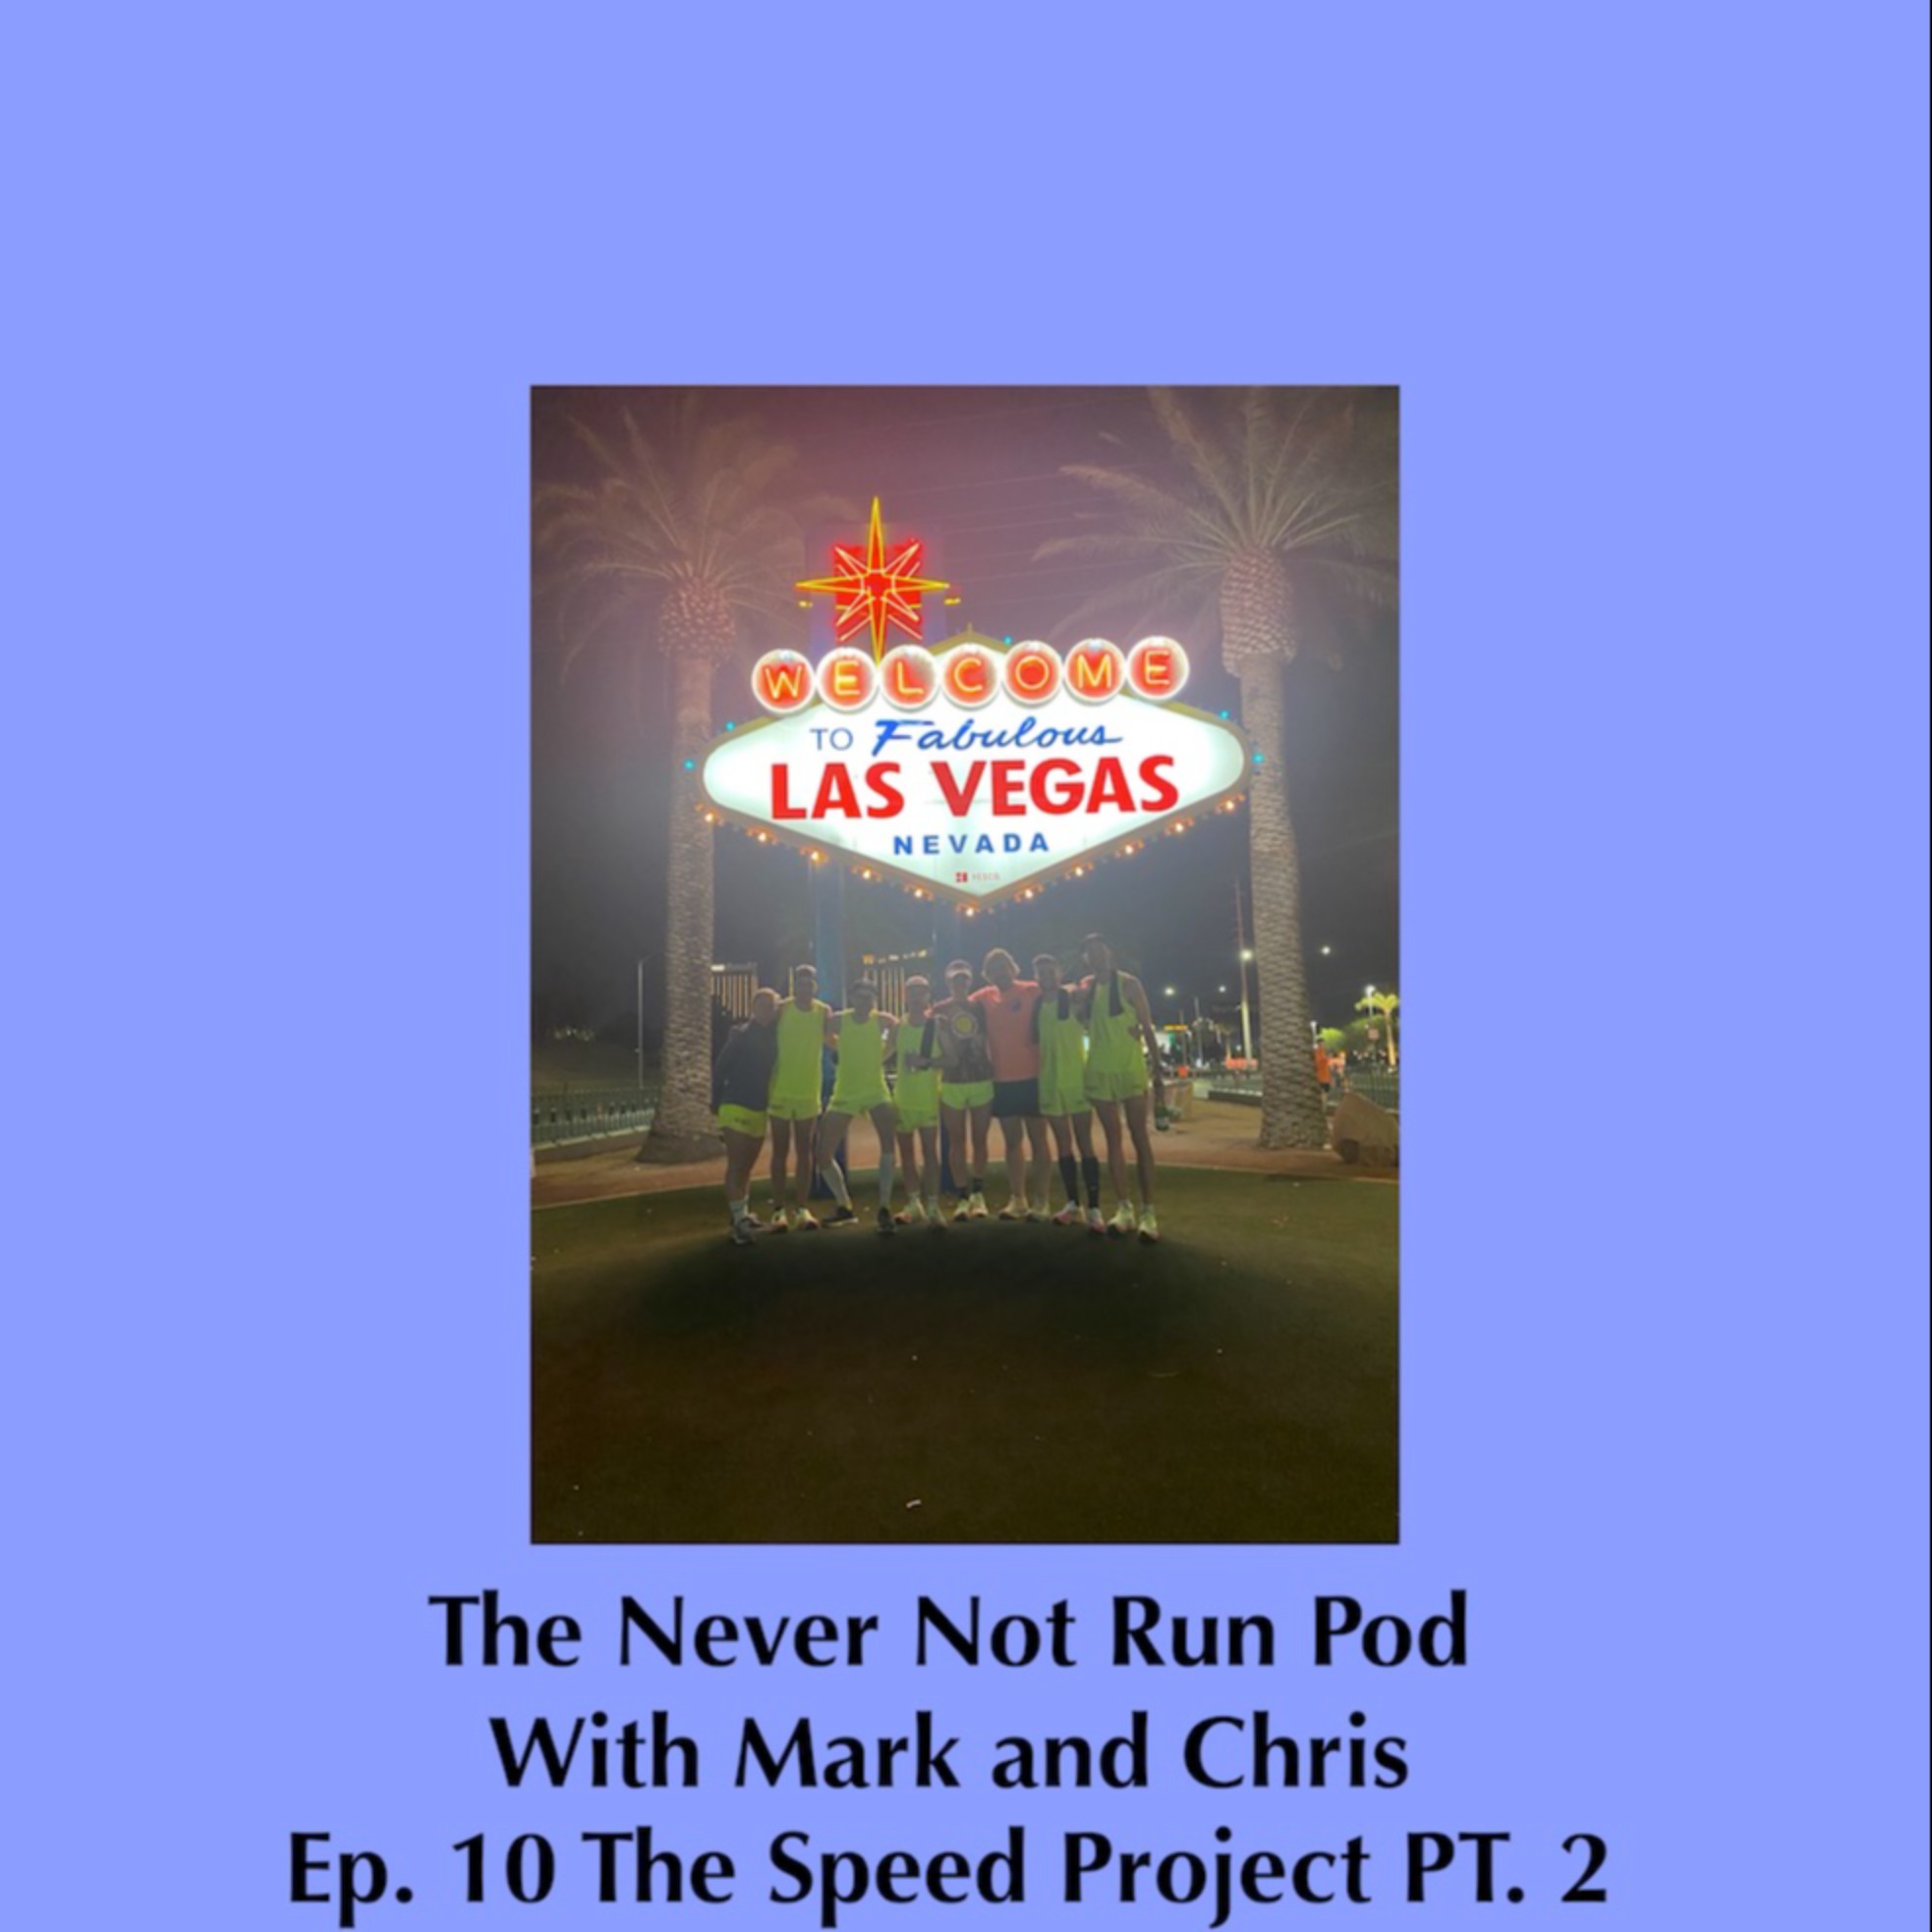 EP 10 / The Speed Project: Part 2 of 2 / Self-Supported Desert Marathons / Arriving on The Strip